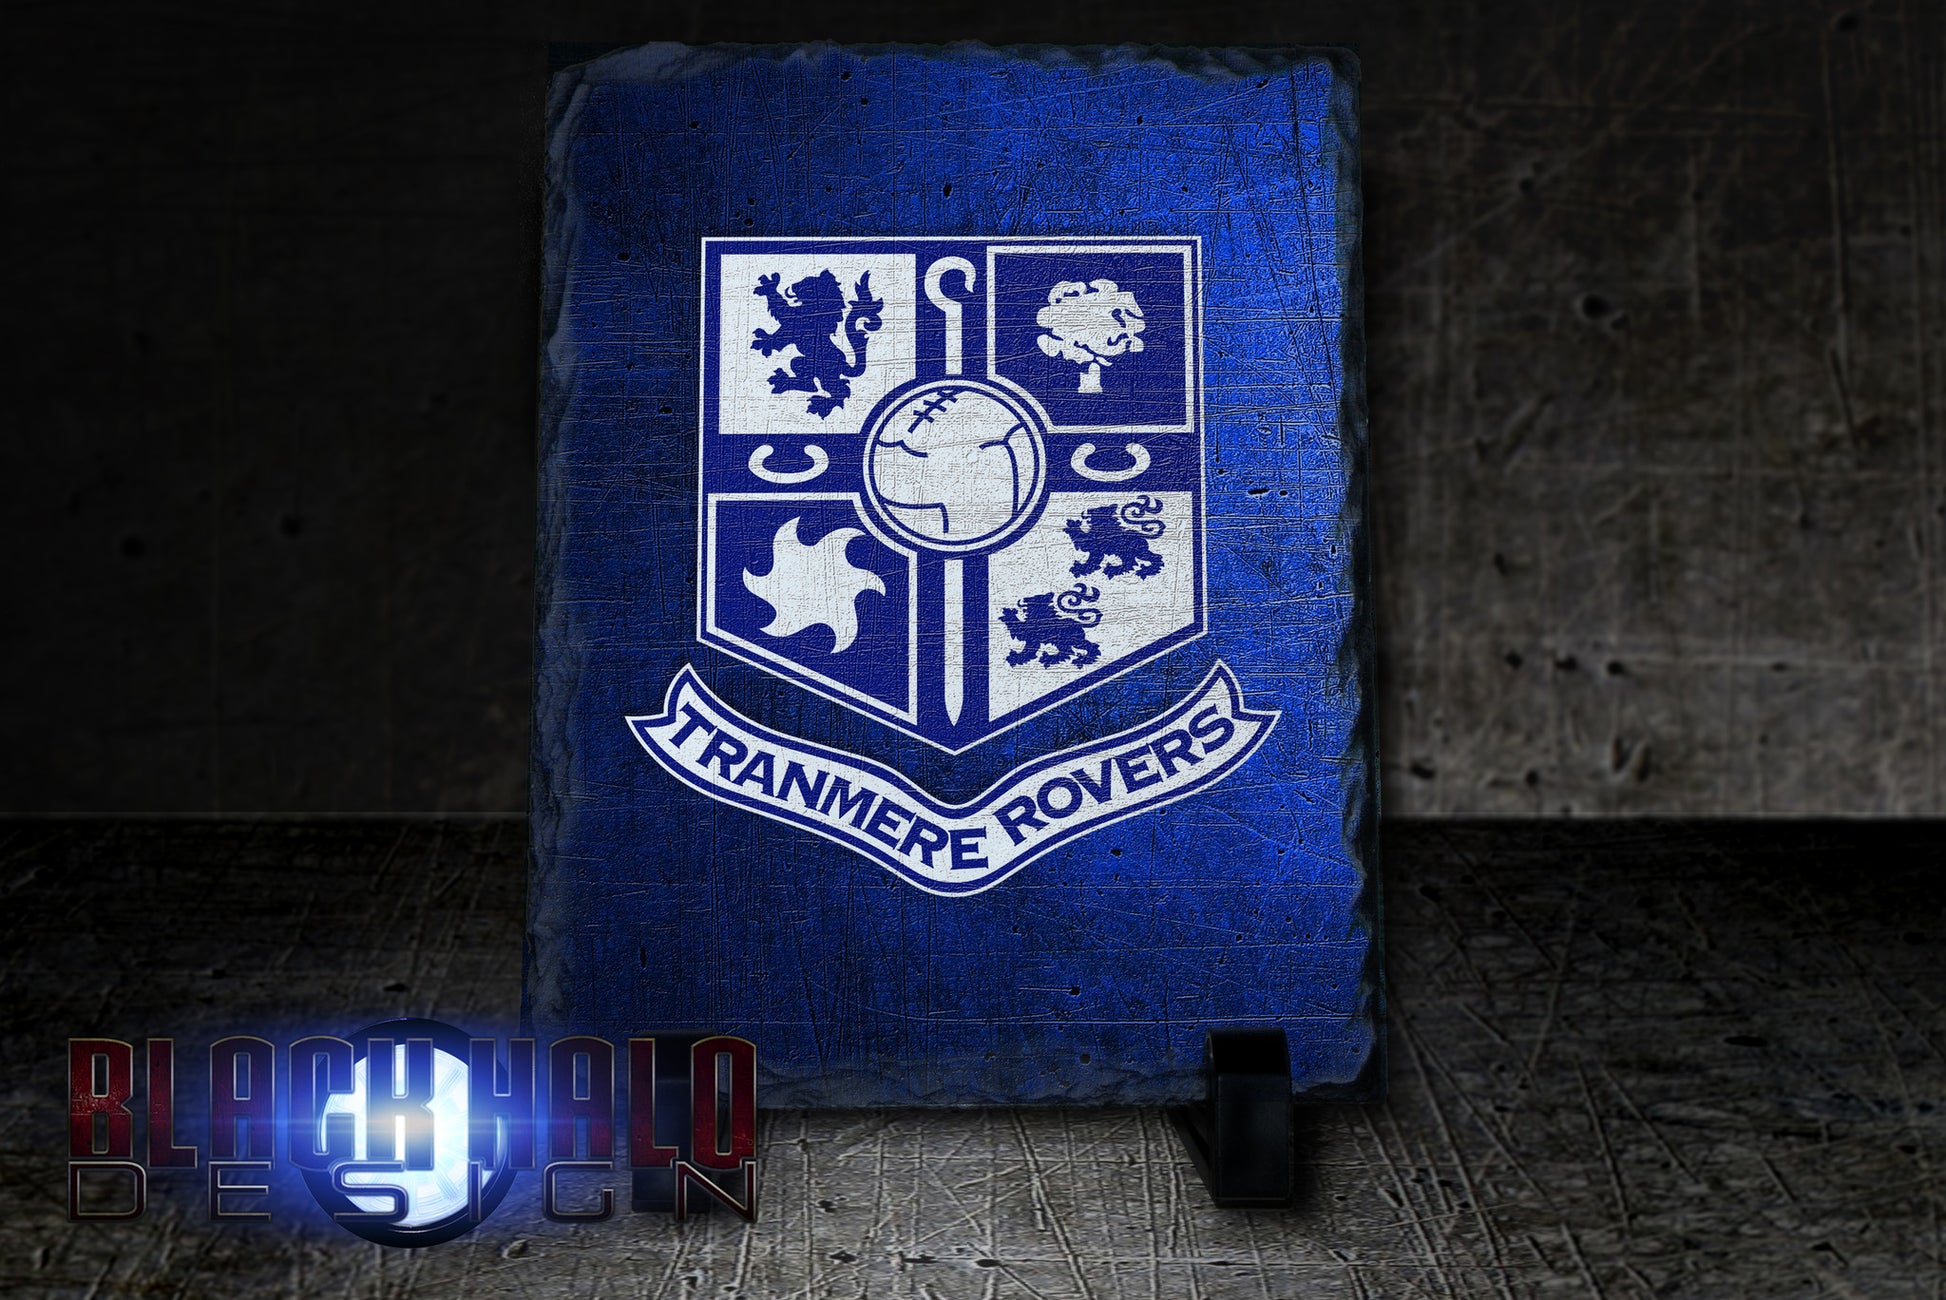 TRANMERE ROVERS RECTANGULAR NATURAL ROCK SLATE (CAN BE PERSONALISED) - Black Halo Design
 - 1